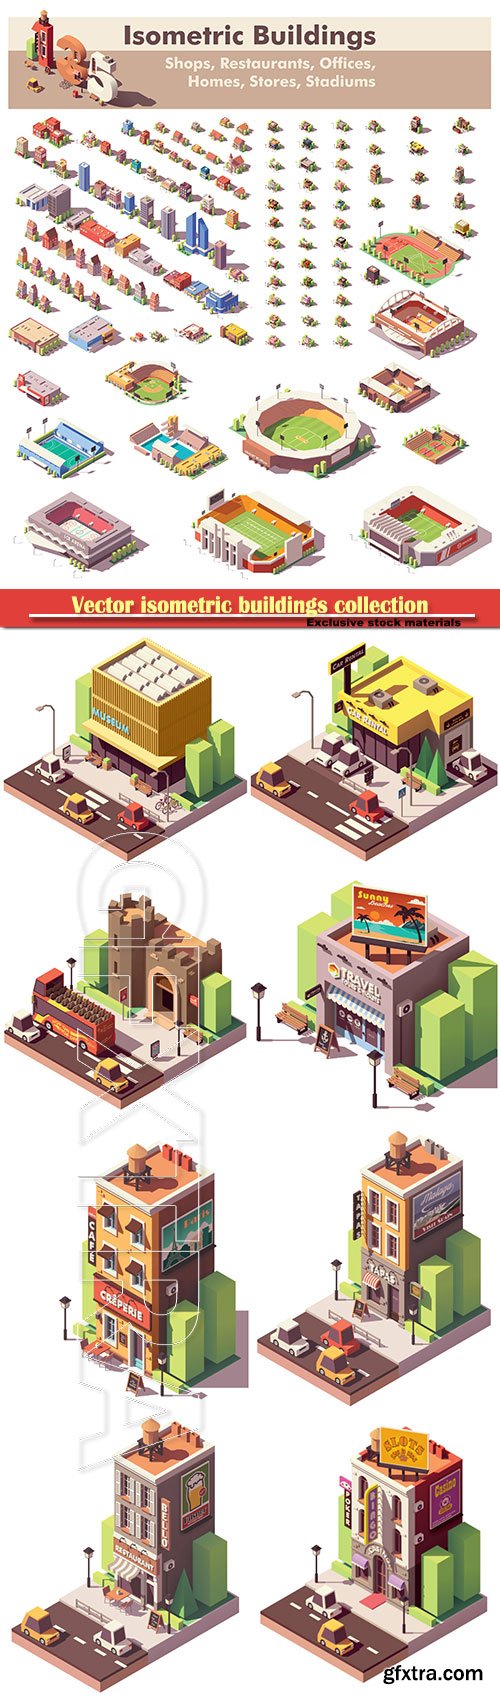 Vector isometric buildings collection, includes homes, offices, stadiums, shops, supermarkets, stores and restaurants